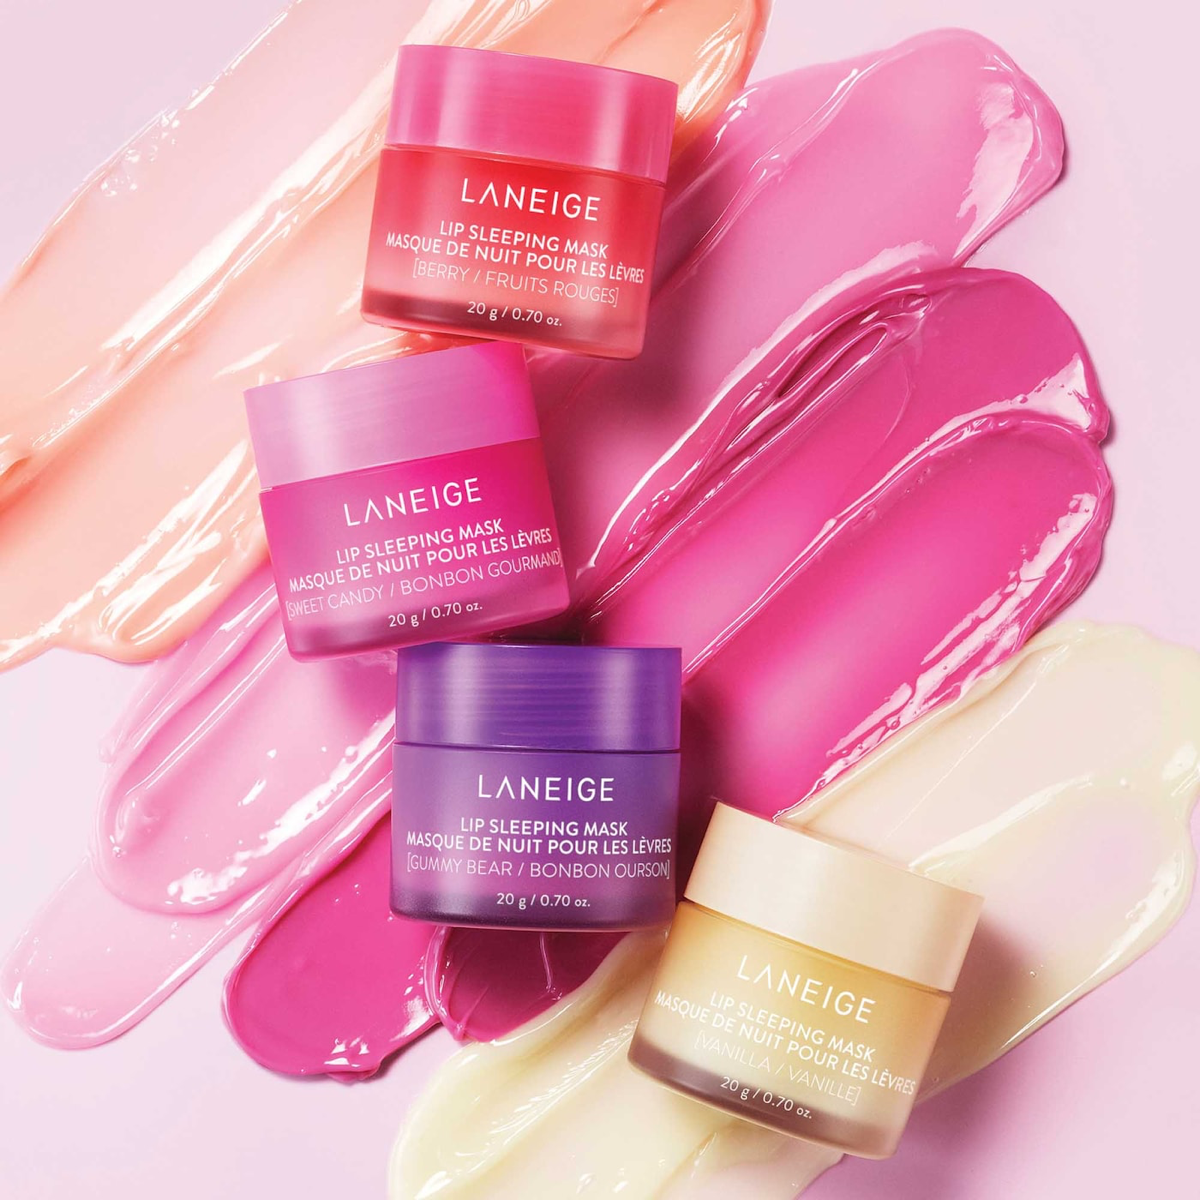 Amazon Prime Day Deal of the Day: This Cult-Fave Lip Mask Is $15 Today